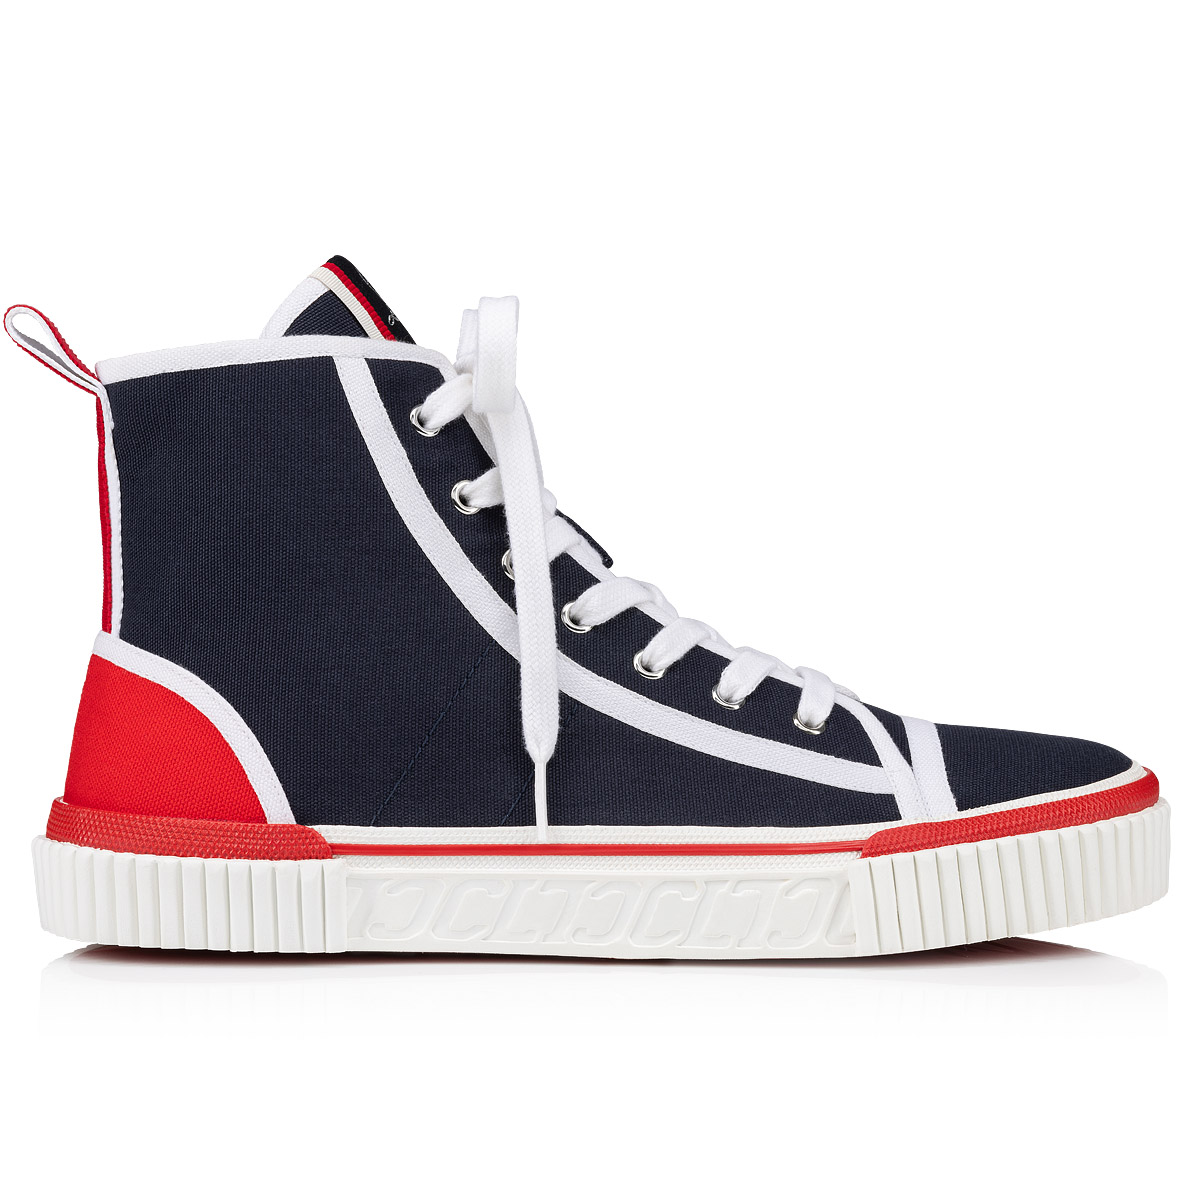 Christian Louboutin Authentic Sneakers Shoes Navy 42 Used from